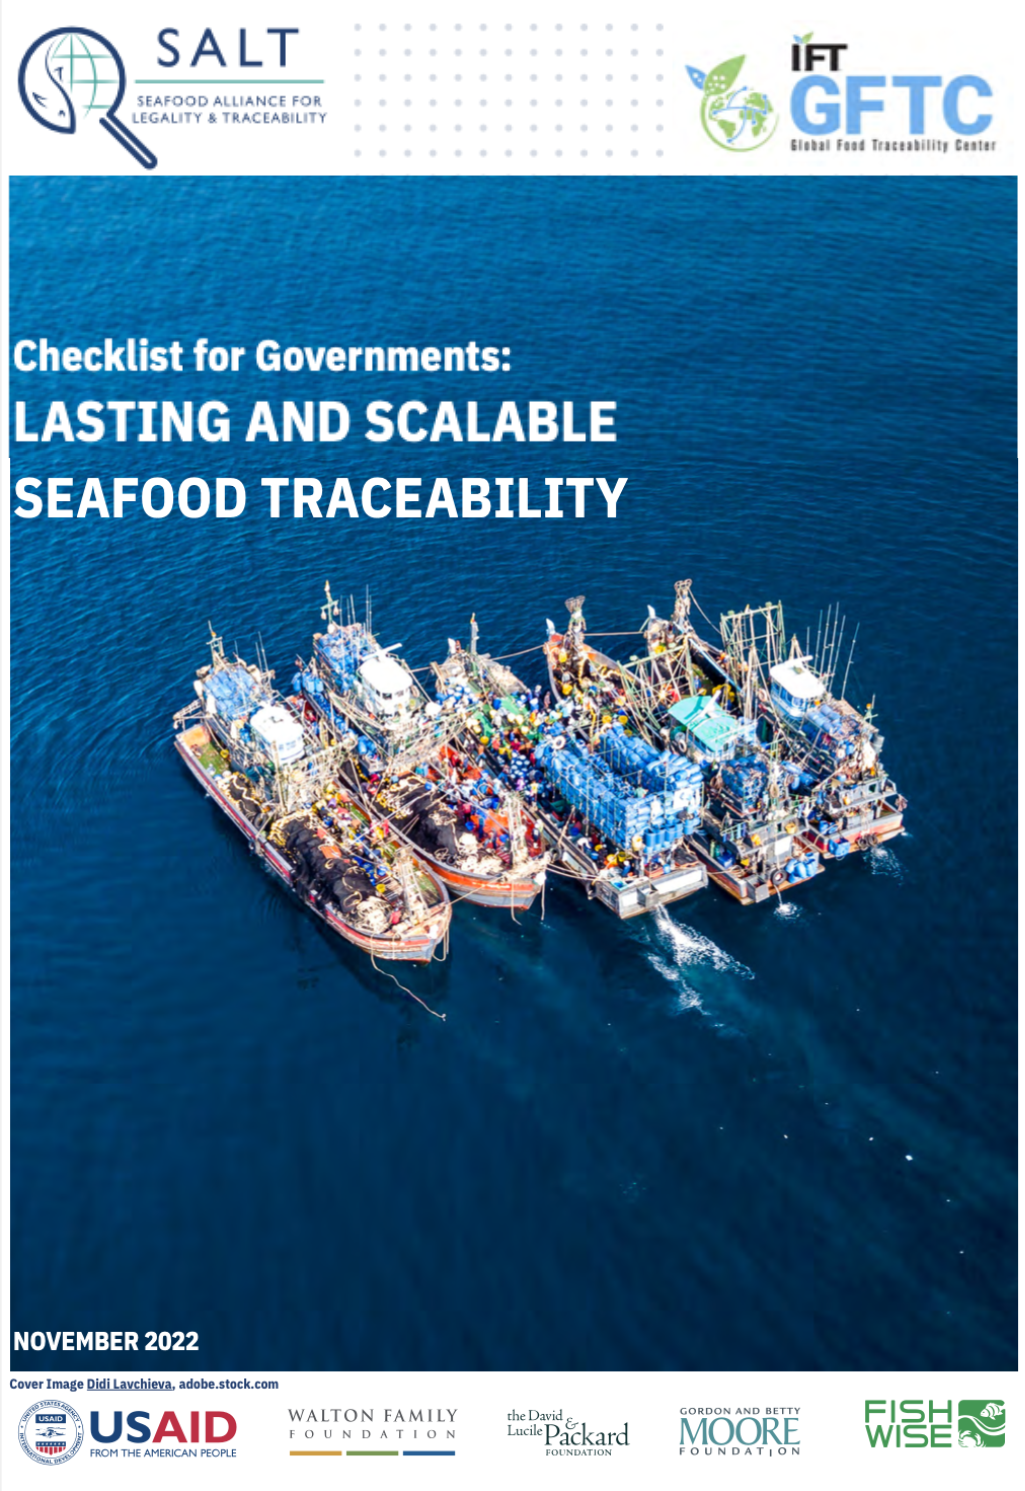 Checklist for Governments: Lasting and Scalable Seafood Traceability